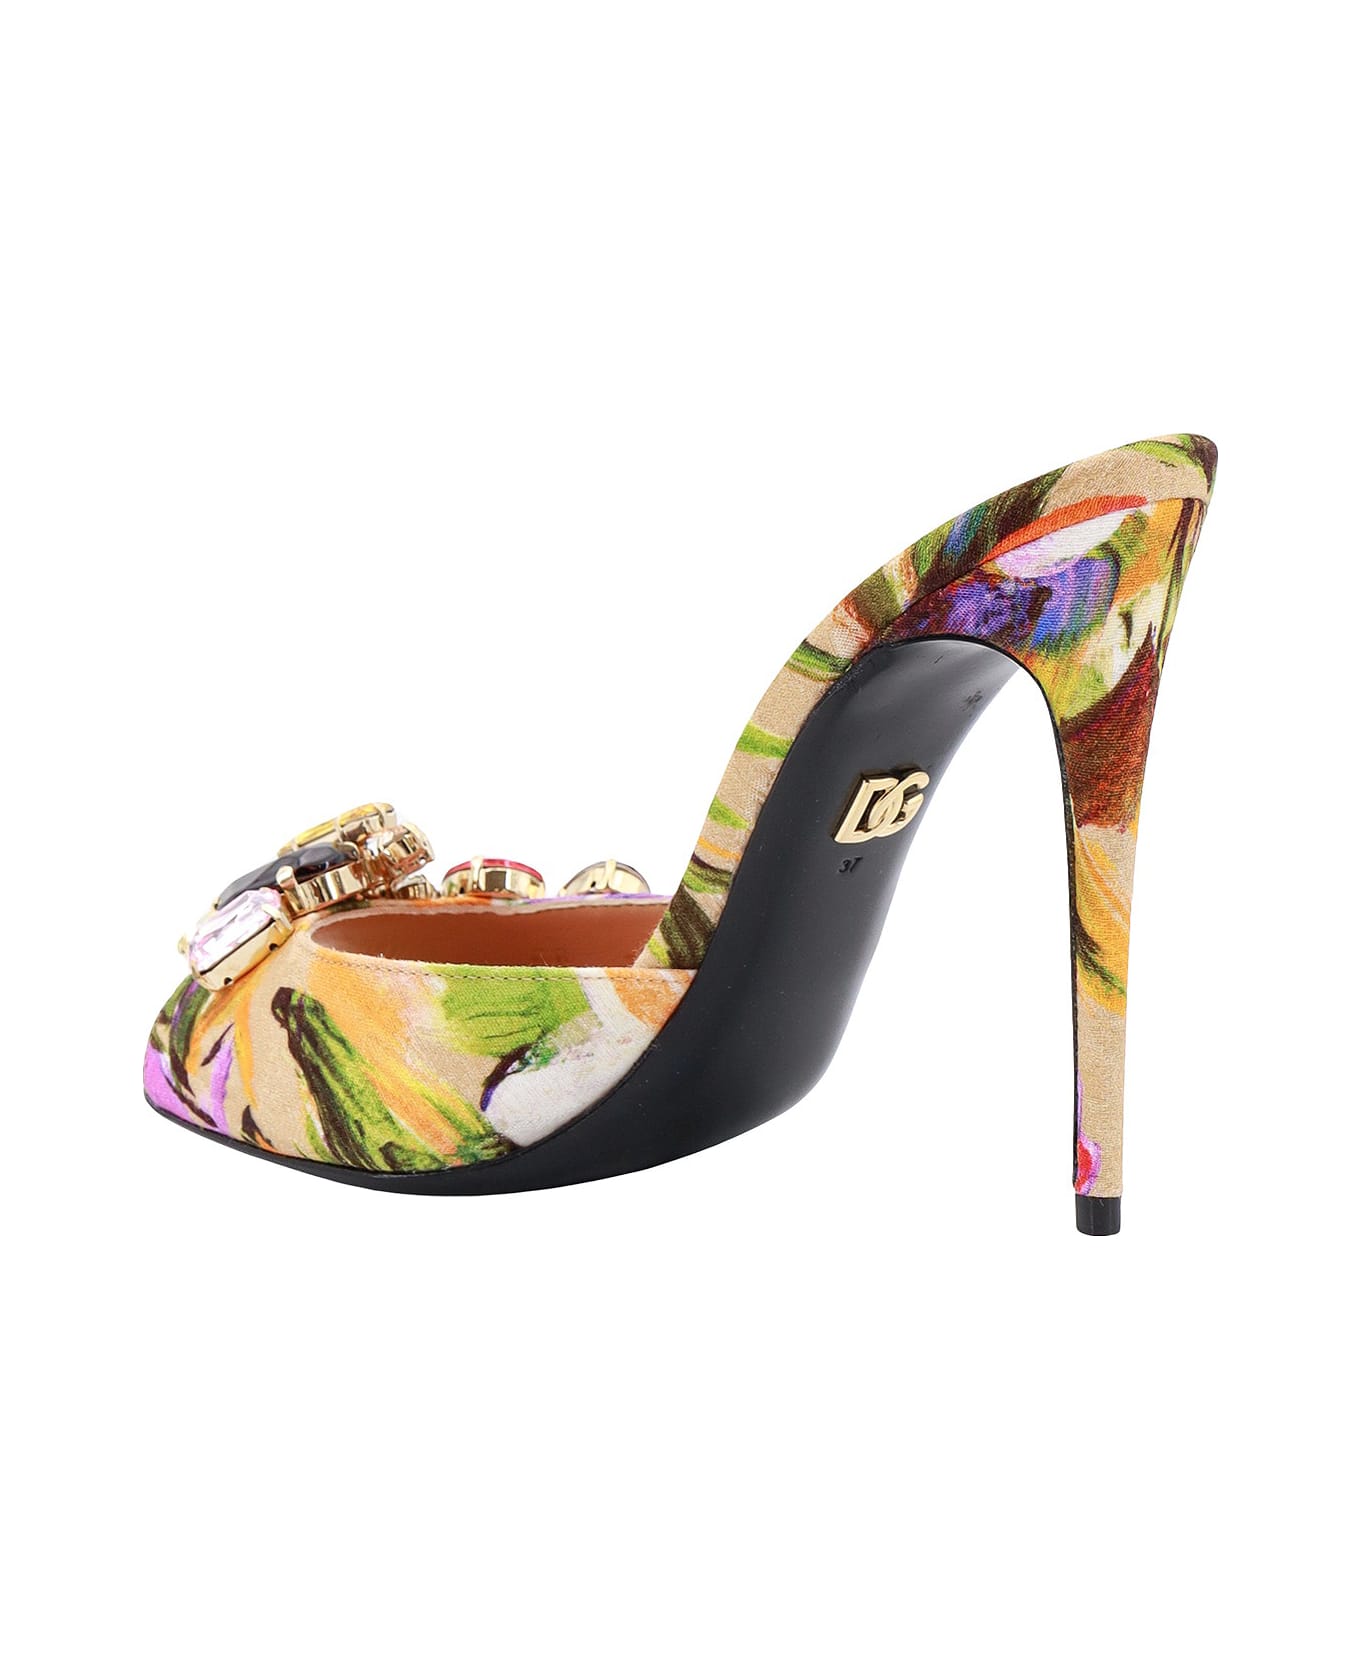 Dolce & Gabbana Fabric Sandals With Floral Motif - Multicolor サンダル